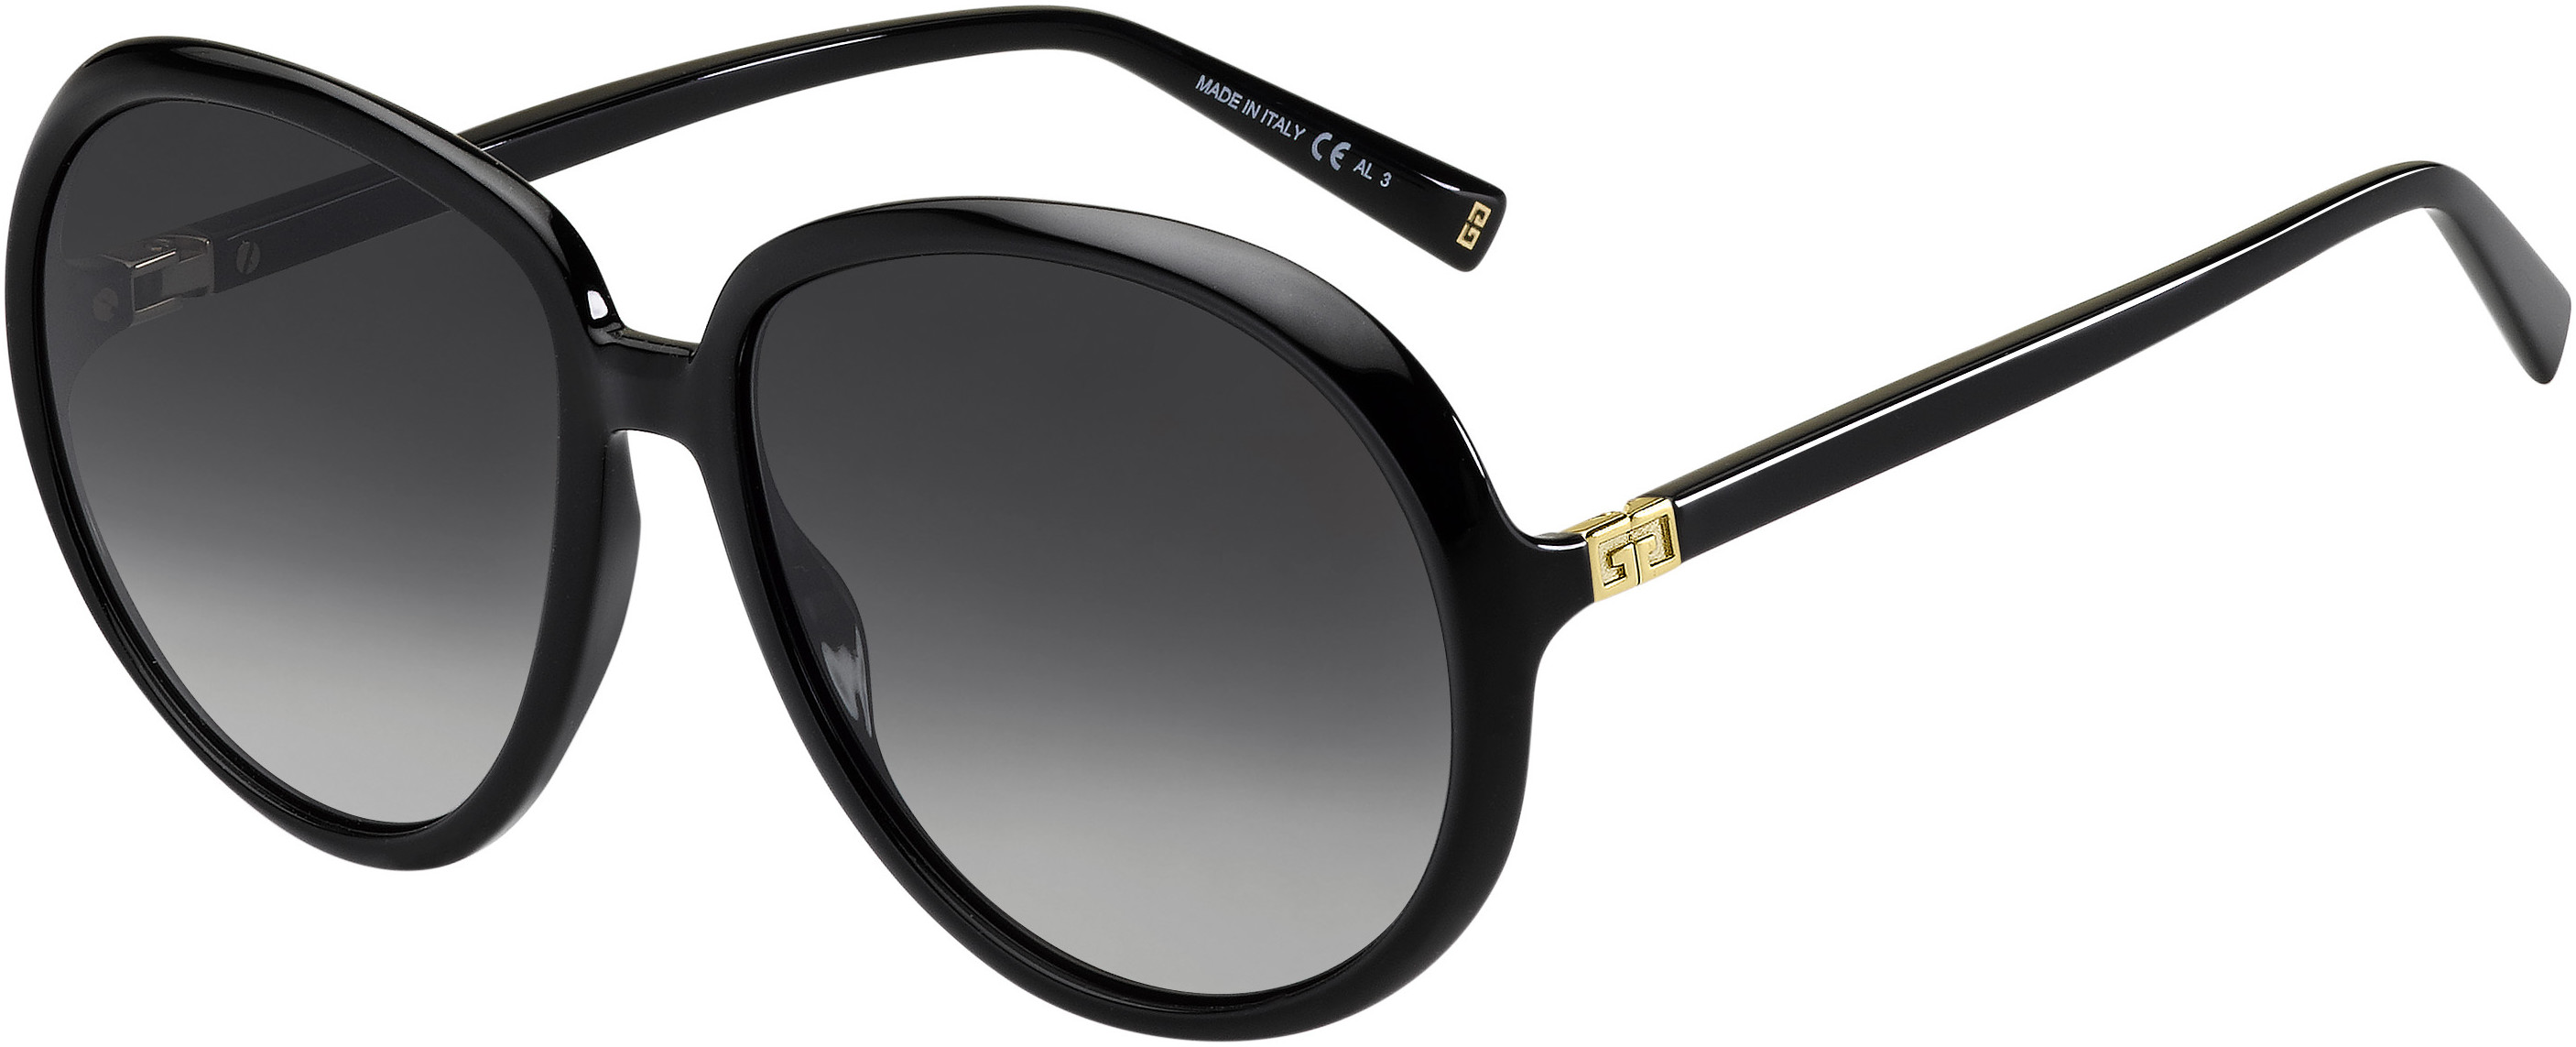 Buy Givenchy Sunglasses directly from OpticsFast.com